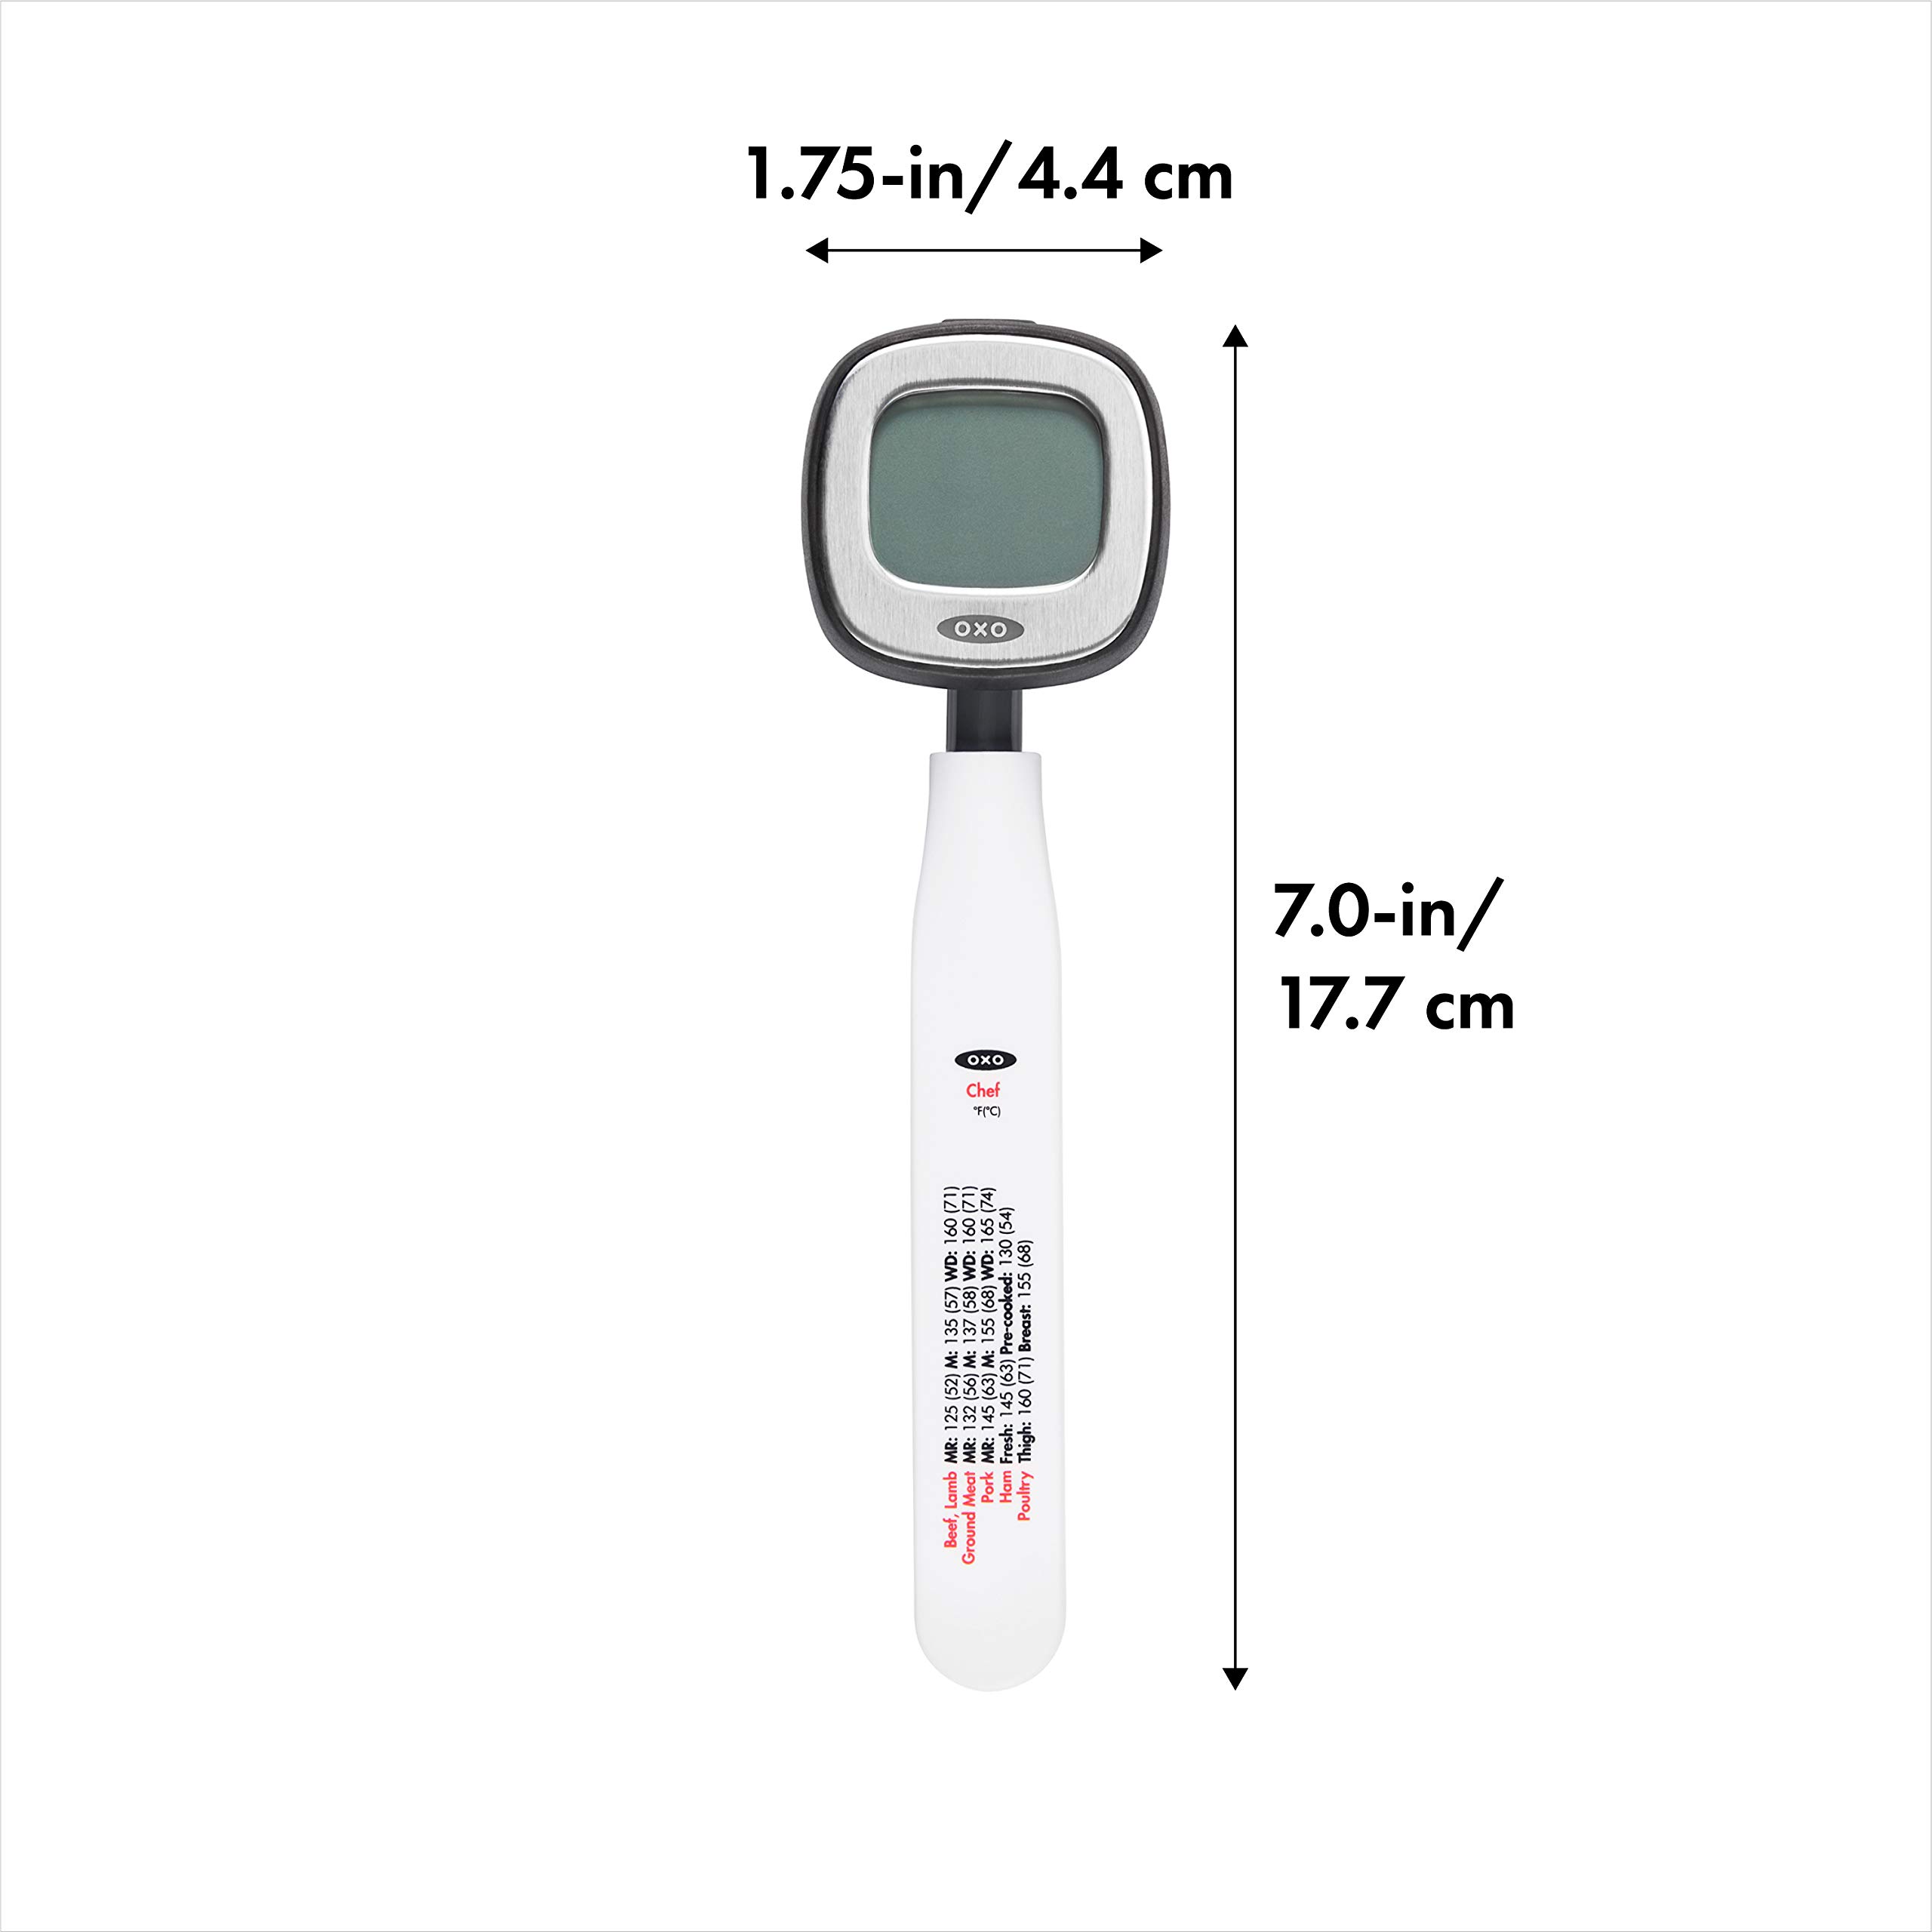 OXO Good Grips Chef's Precision Digital Instant Read Thermometer & Good Grips Chef's Precision Meat Thermometer, Silver